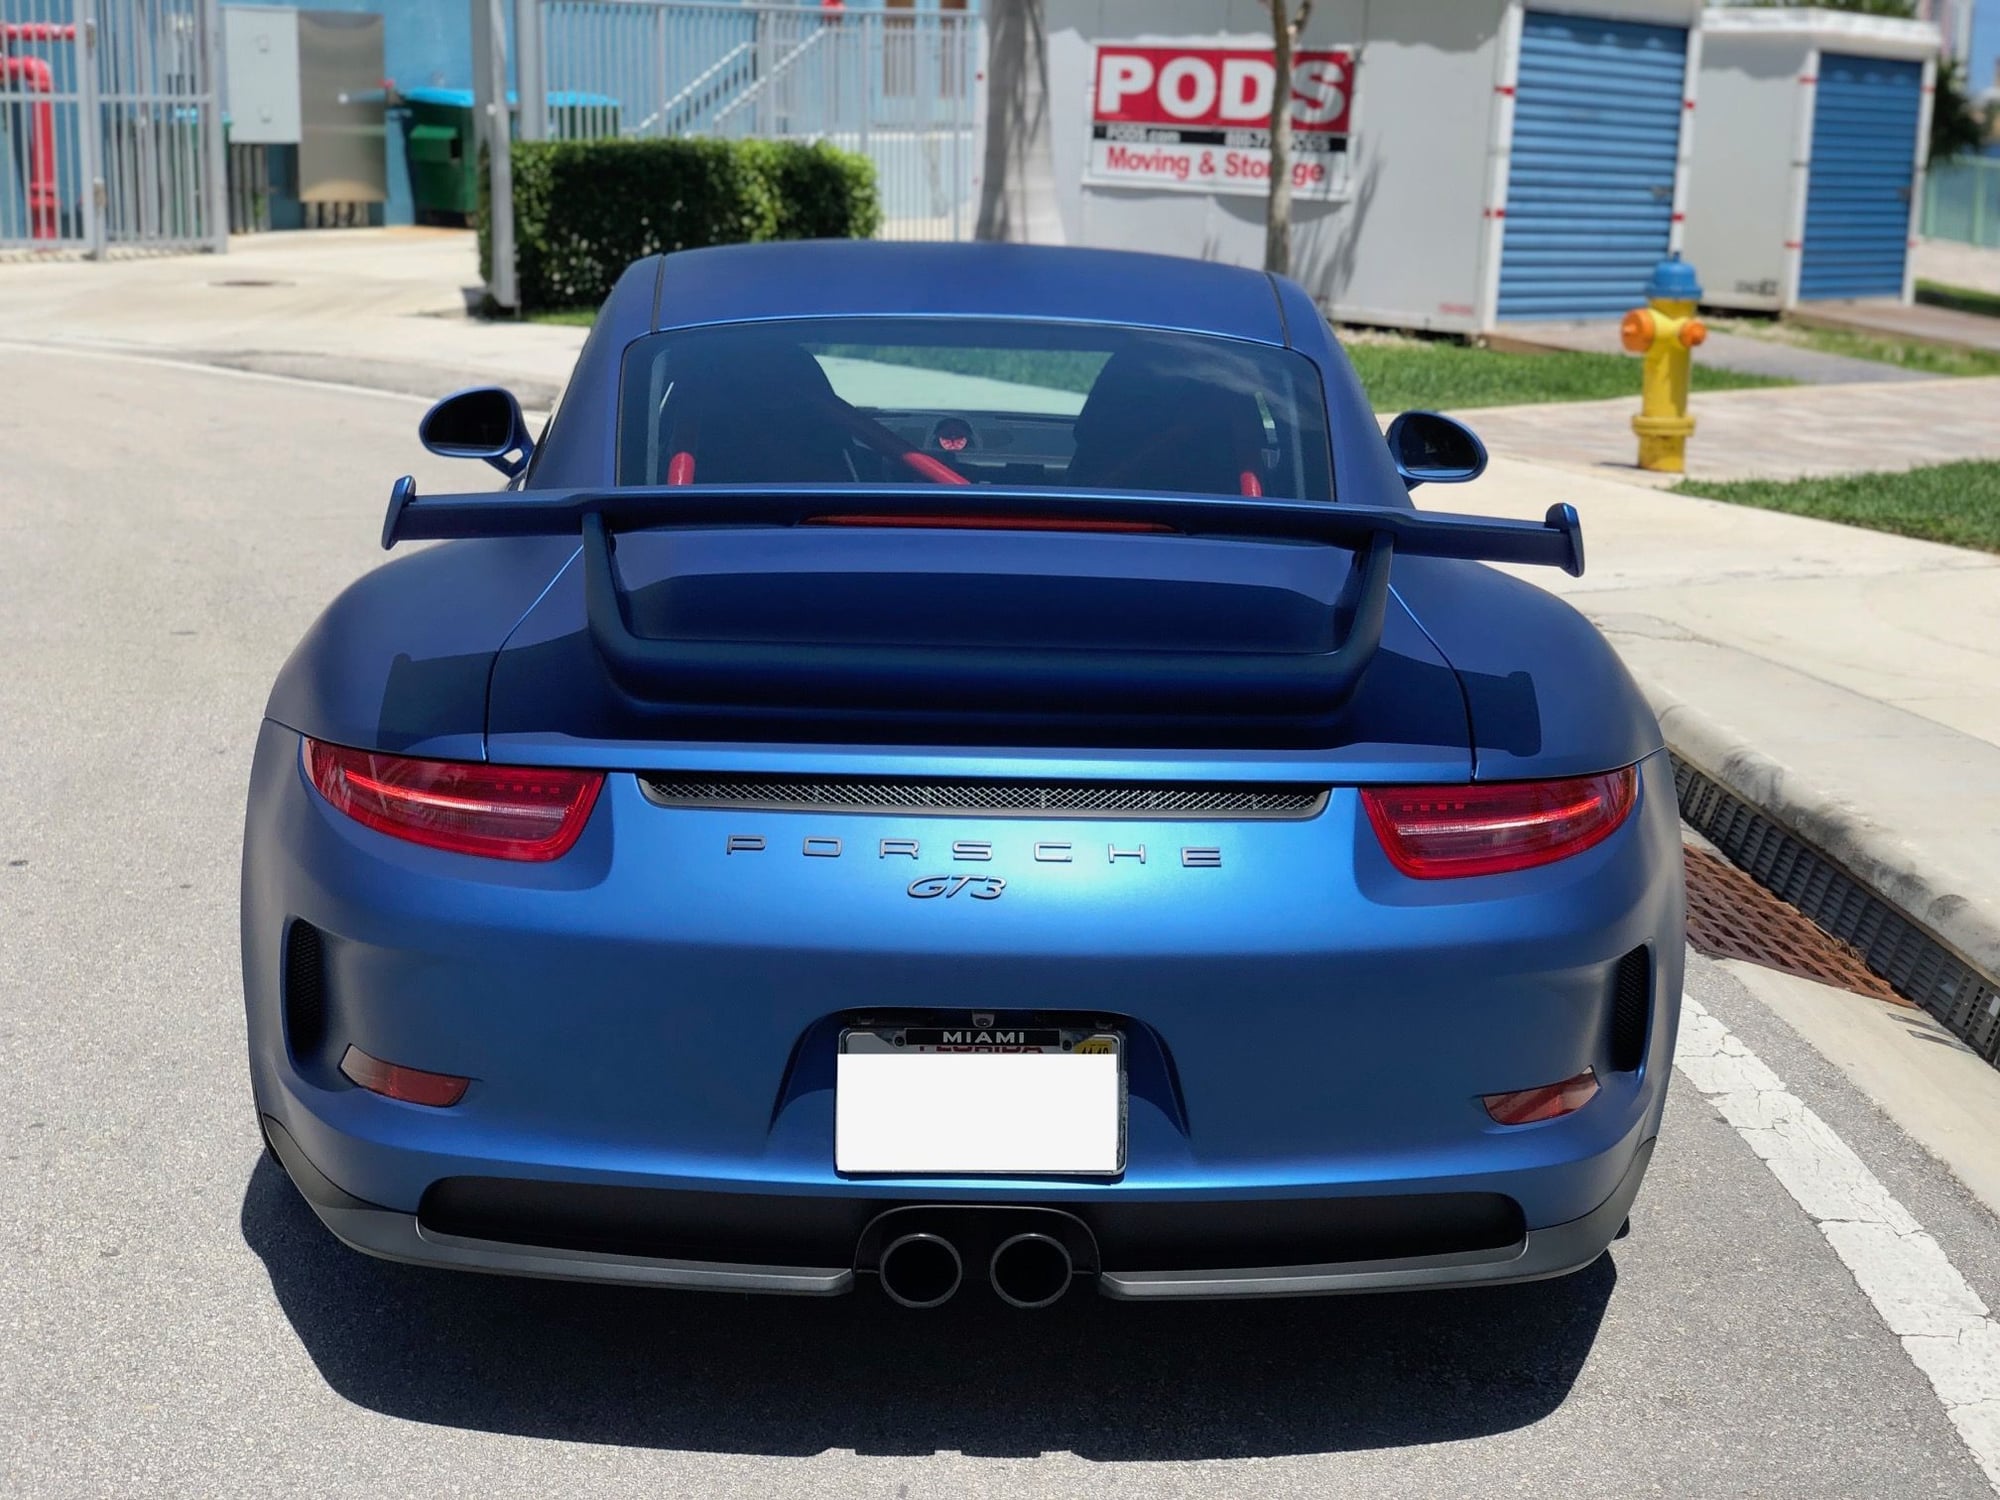 2015 Porsche GT3 - GT3 for a track enthusiast! - Used - VIN WPOAC2A98FS189093 - 15,500 Miles - 6 cyl - 2WD - Automatic - Coupe - Blue - Miami, FL 33180, United States